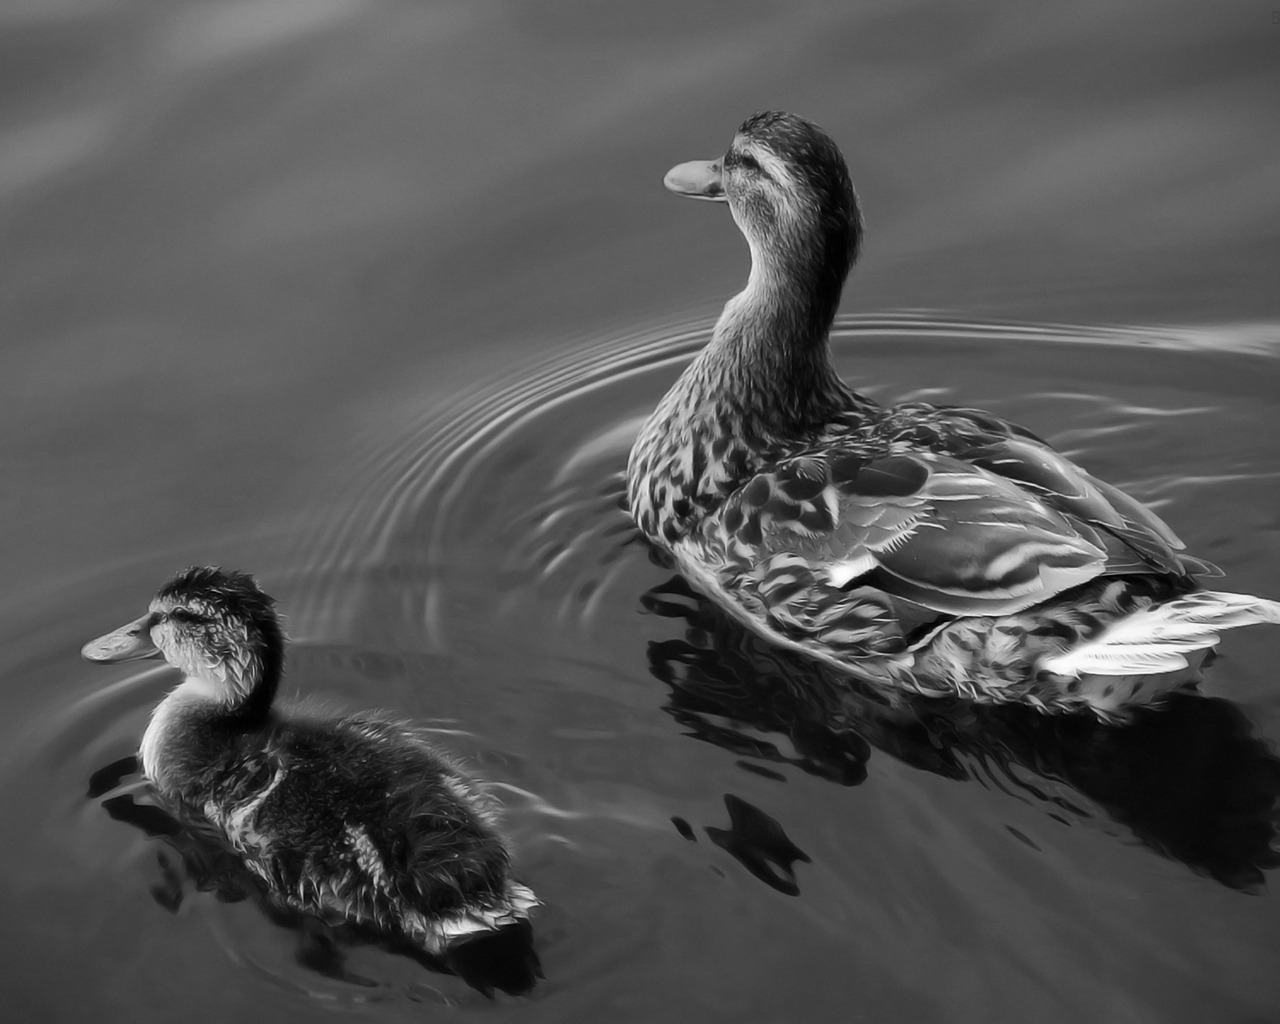 Two Ducks on Lake for 1280 x 1024 resolution